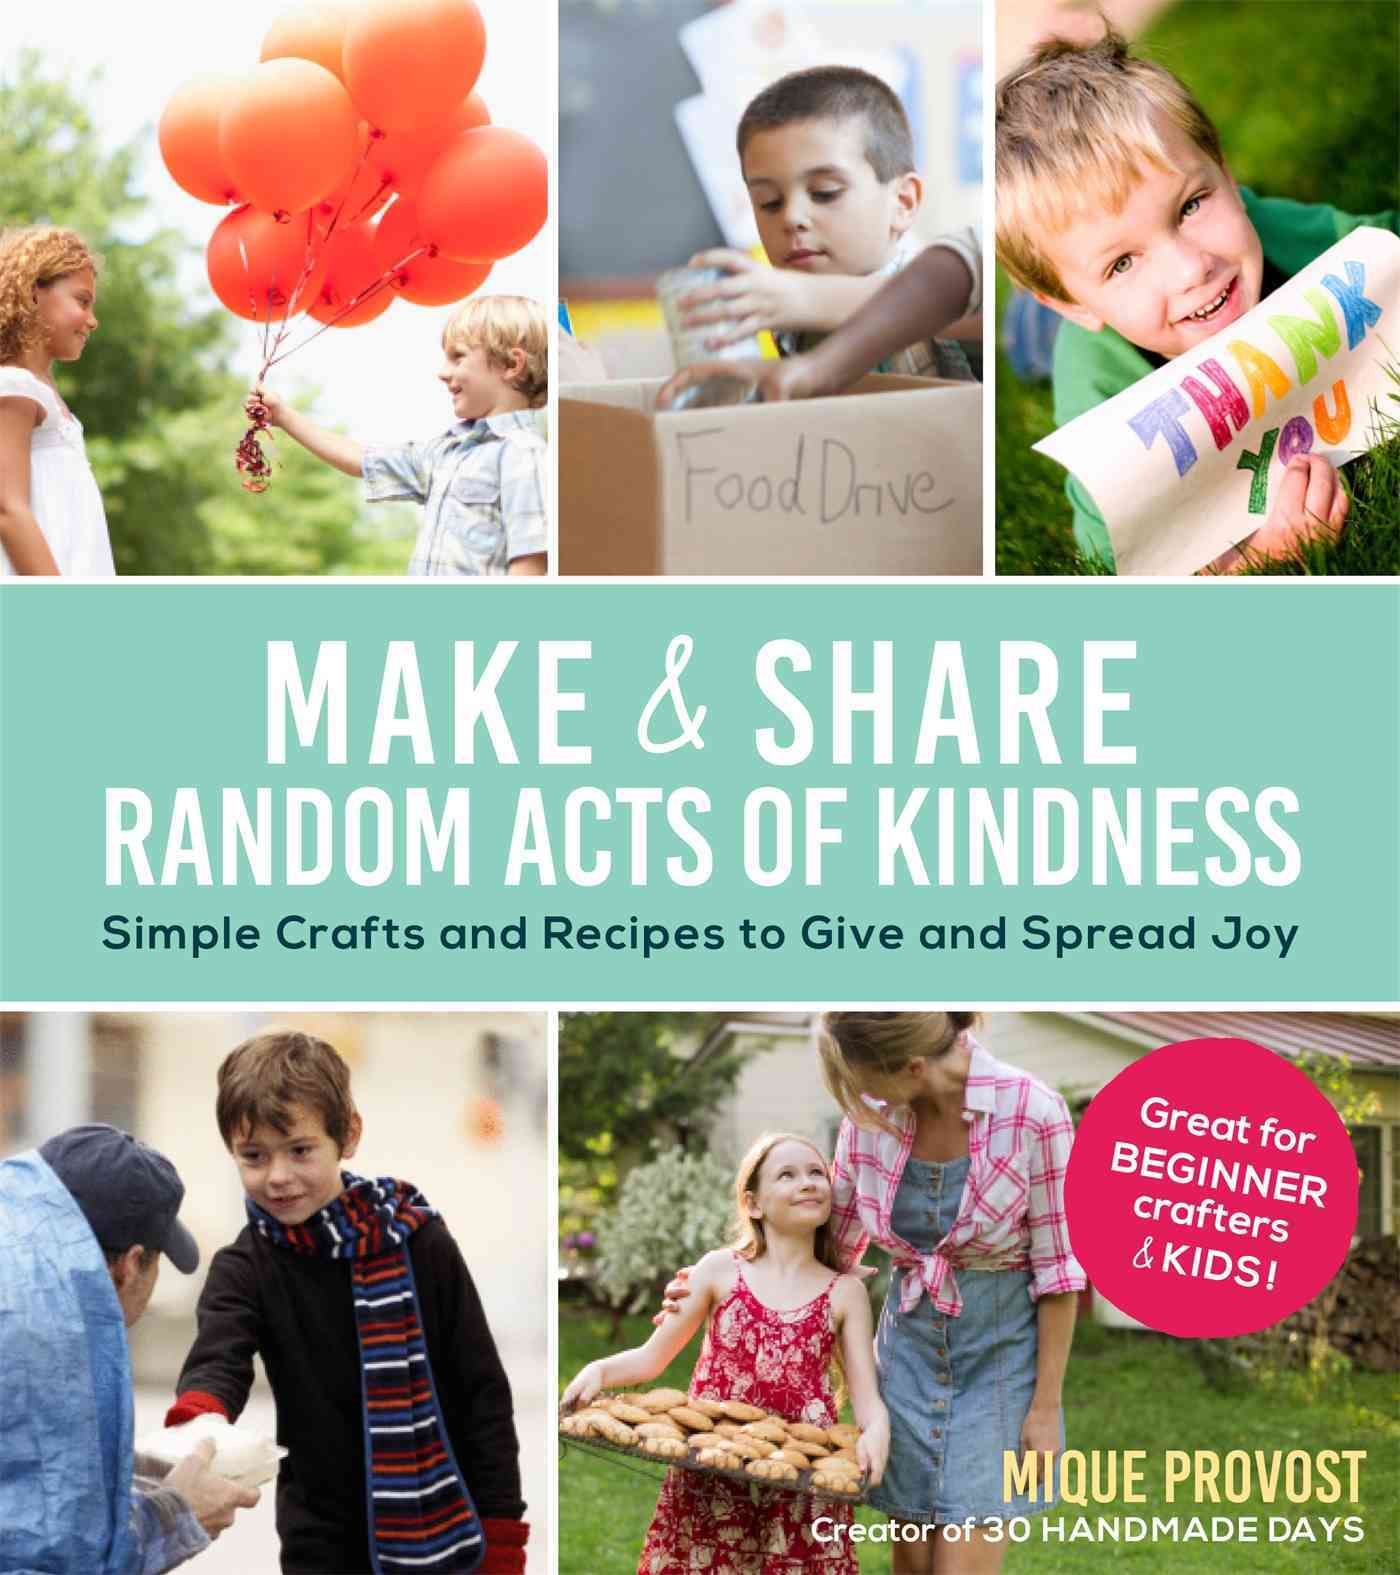 Make & Share Random Acts of Kindness: Simple Crafts and Recipes to Give and Spread Joy